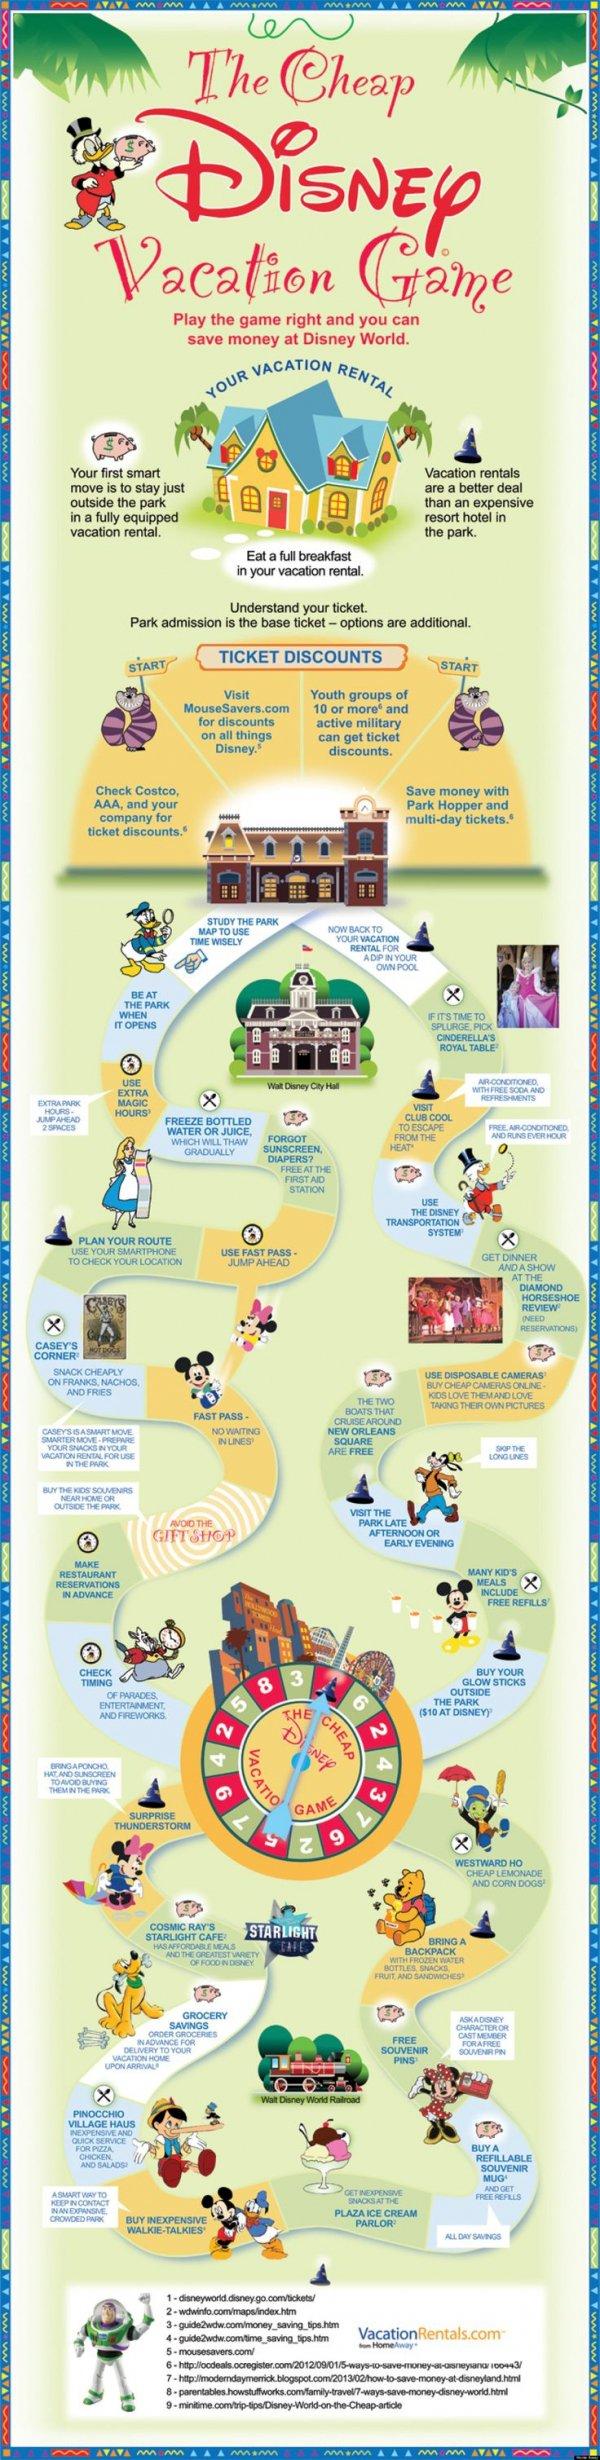 How To Save Time And Money At Disney World